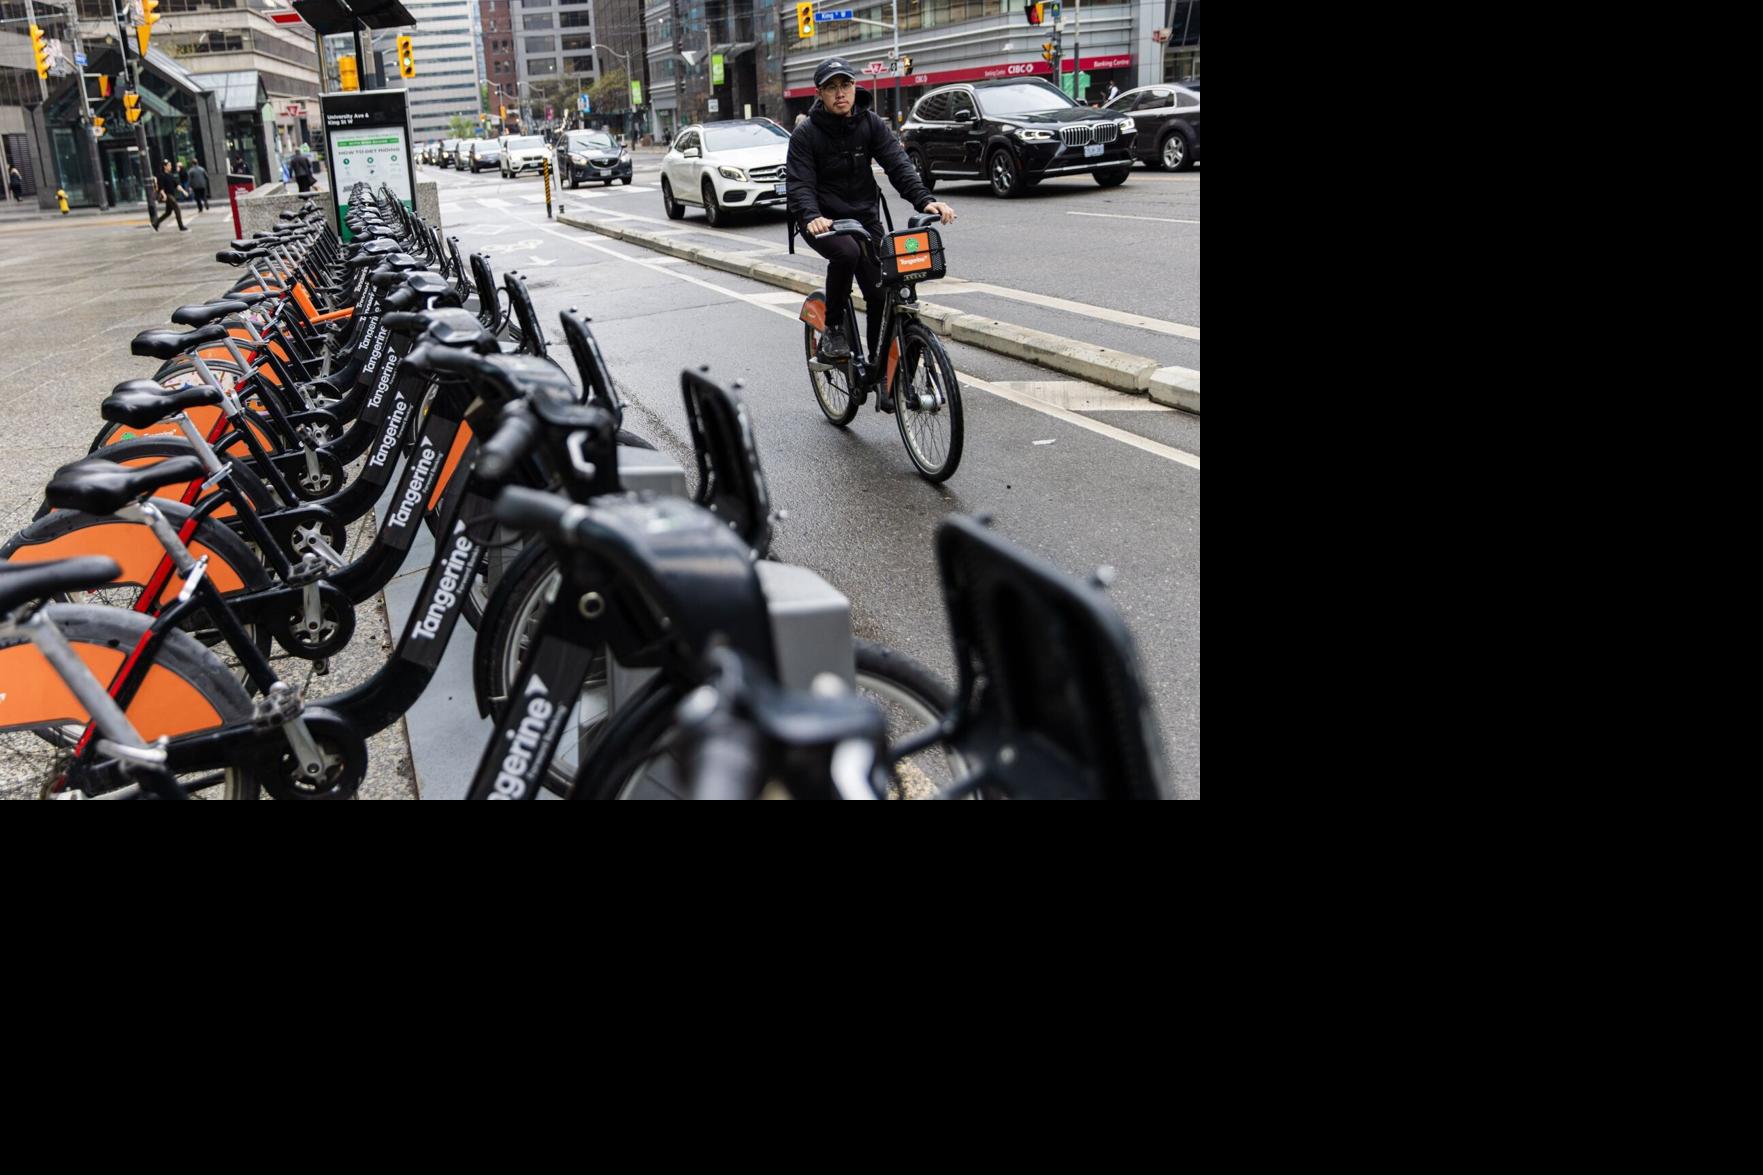 Toronto will have free access to bike share program this Friday